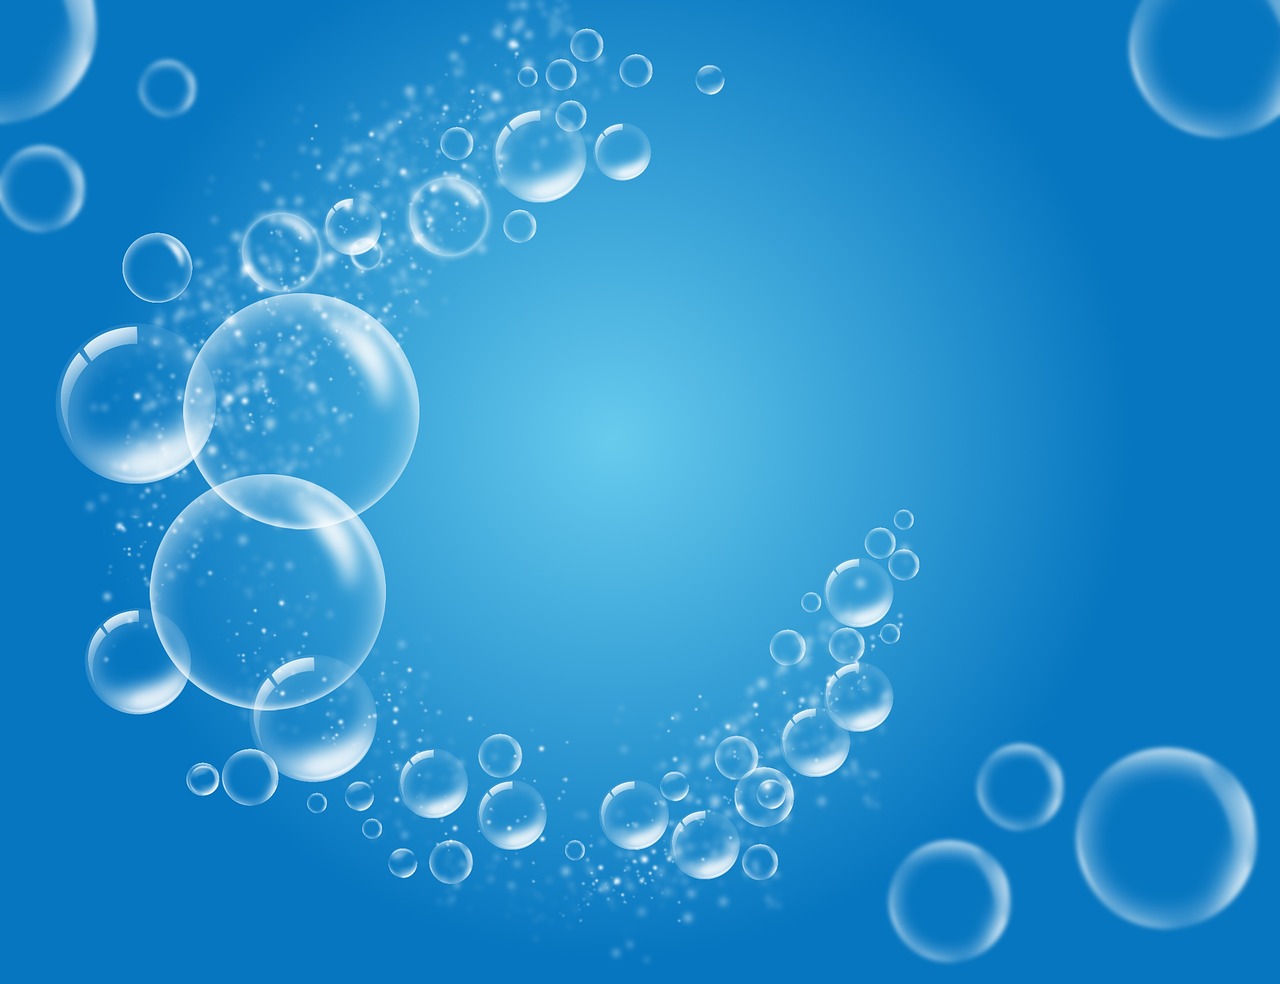 the background wallpaper the bubbles free photo